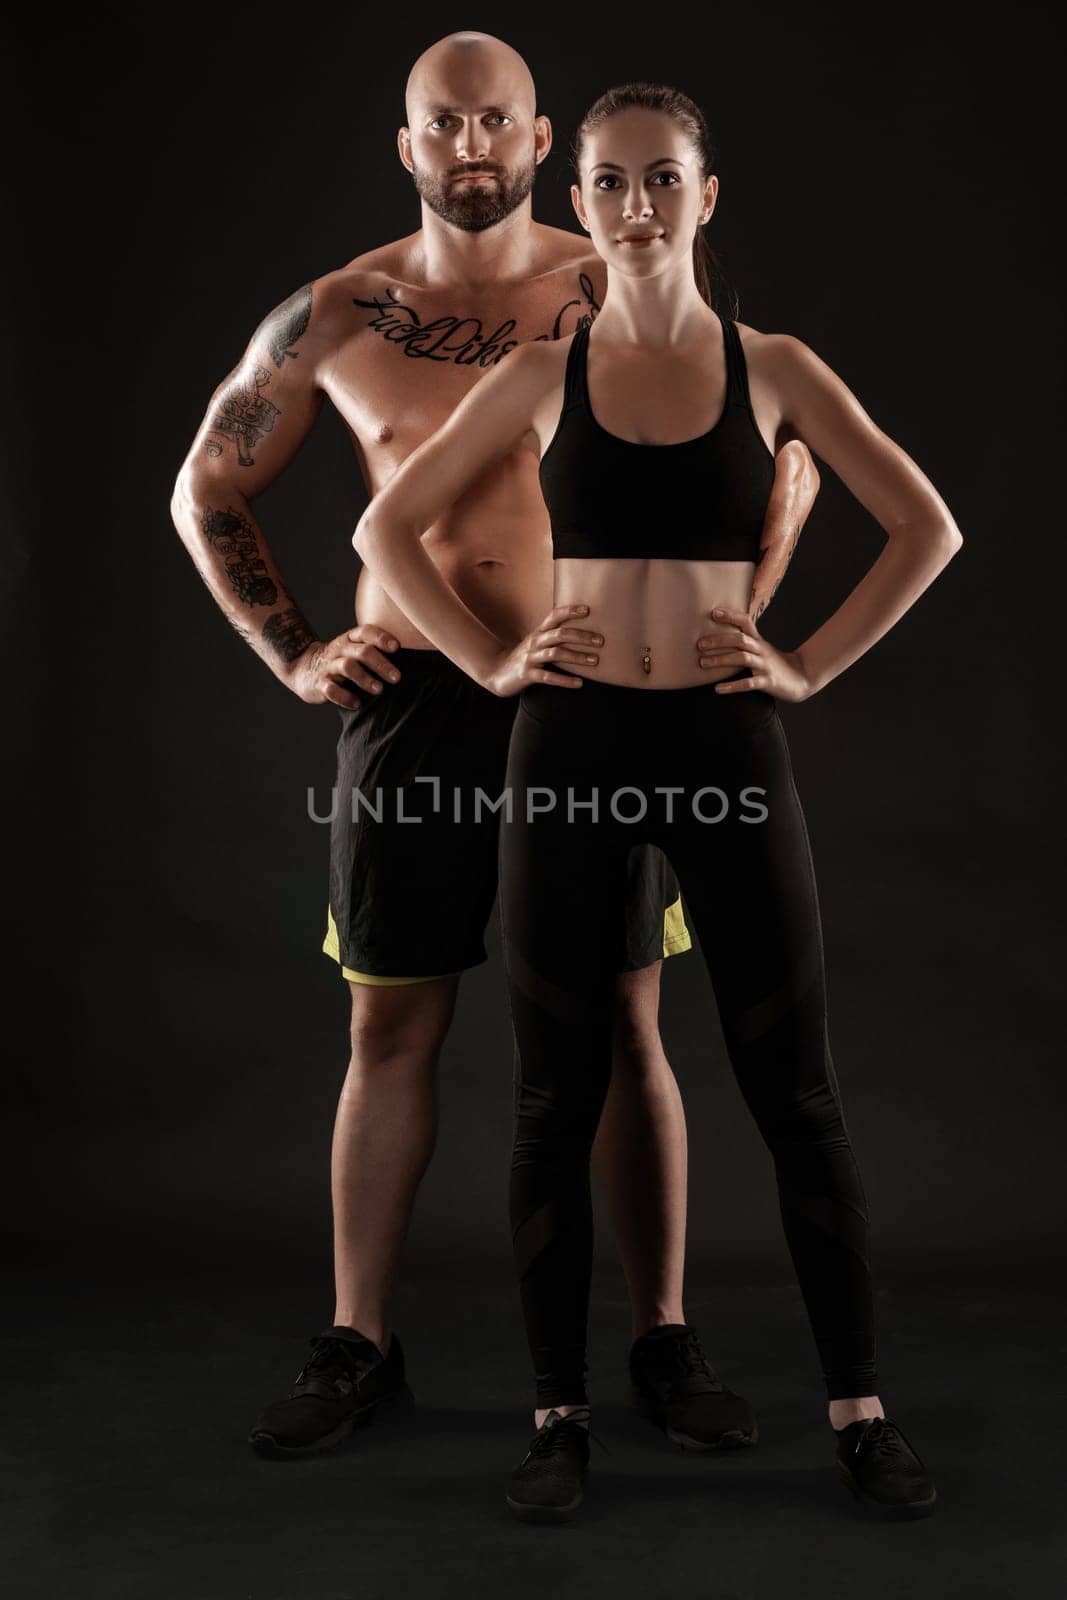 Handsome bald, tattooed fellow in black shorts and sneakers with gorgeous brunette lady in leggings and top are posing on black background and looking at the camera. Fitness couple, chic muscular bodies, gym concept. The love story.